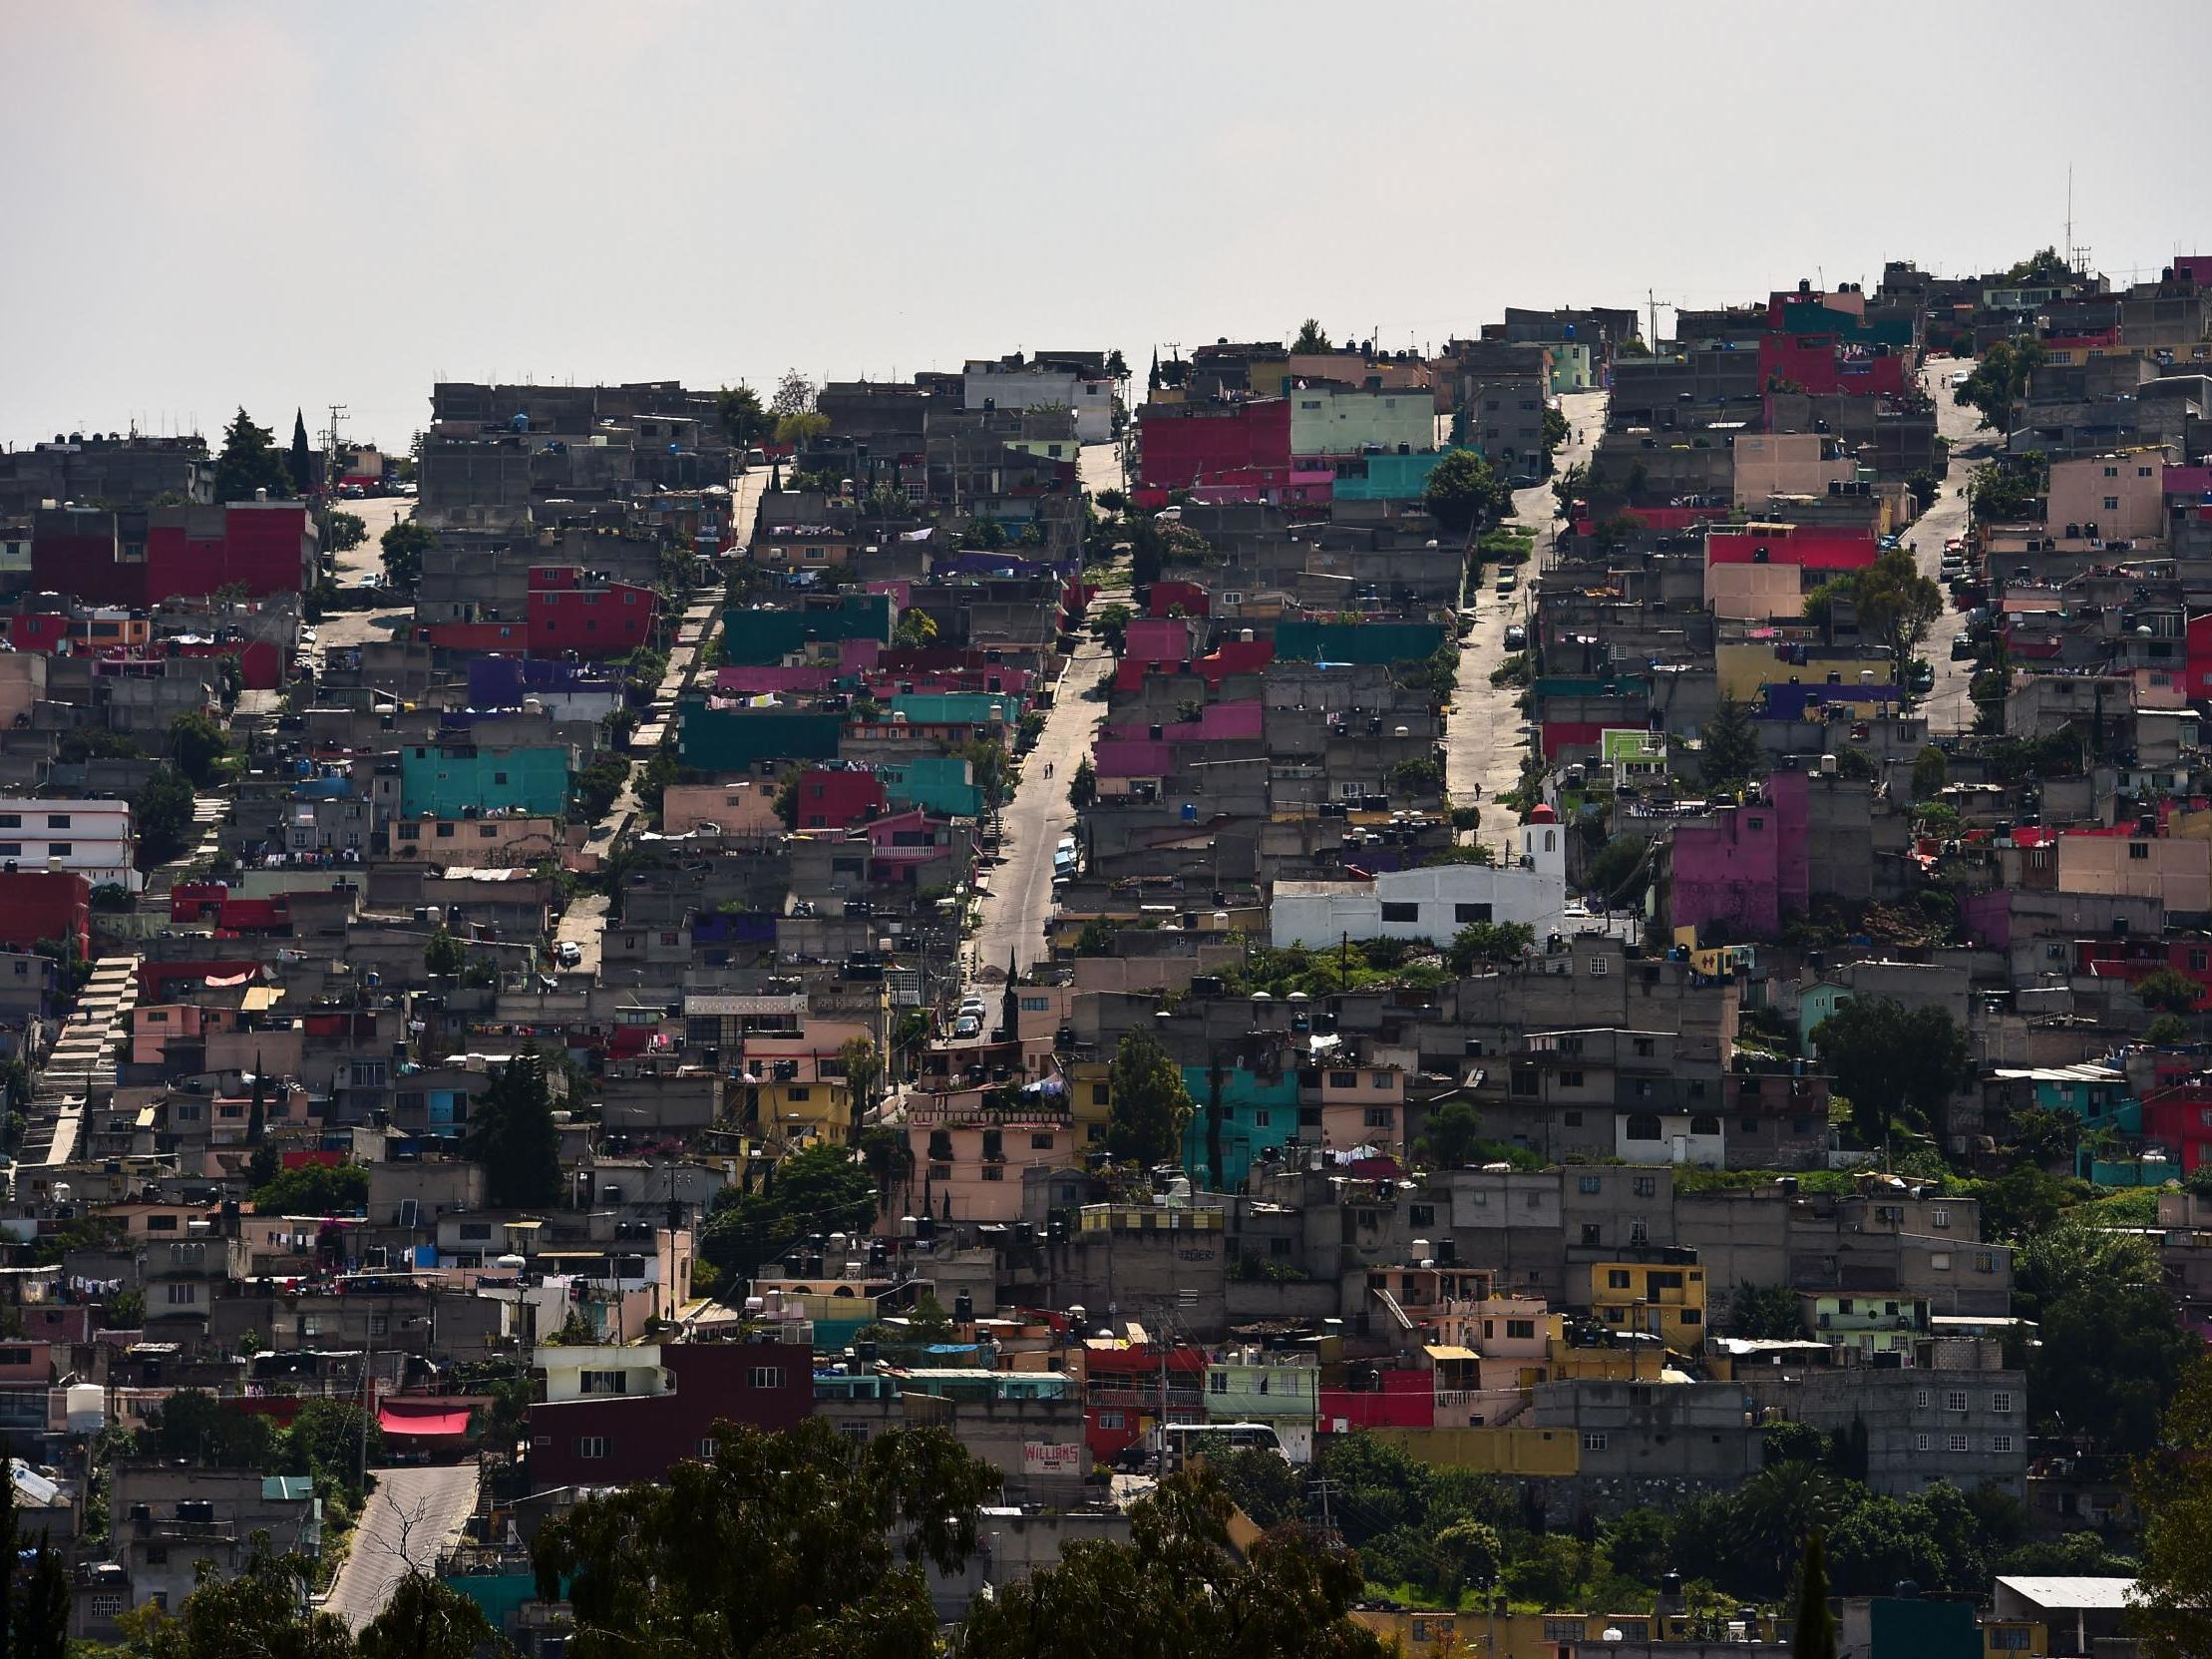 A slum in Ecatepec, which is notorious for its high murder rate